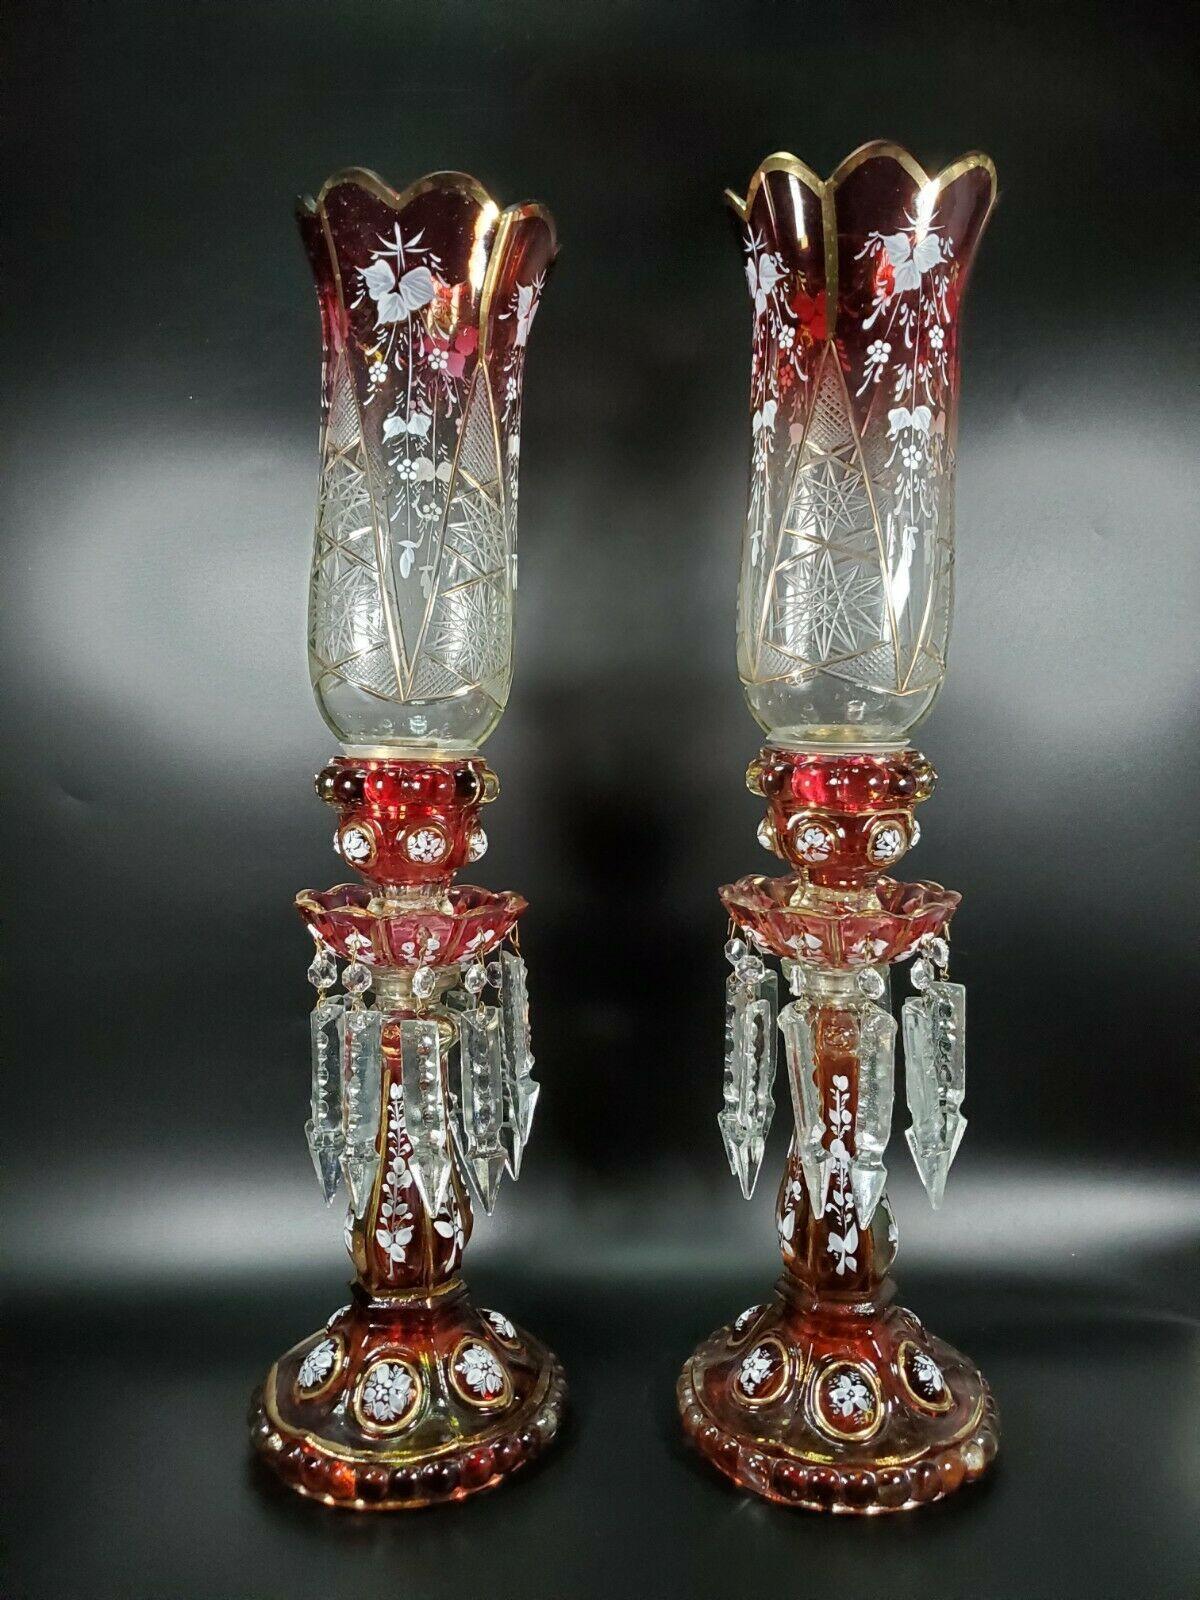 c1890 Pair French Napoleon III Crystal aand Glass Red Candle Lamps/ Candle Holders. Attrib. Baccarat Medallion Series.